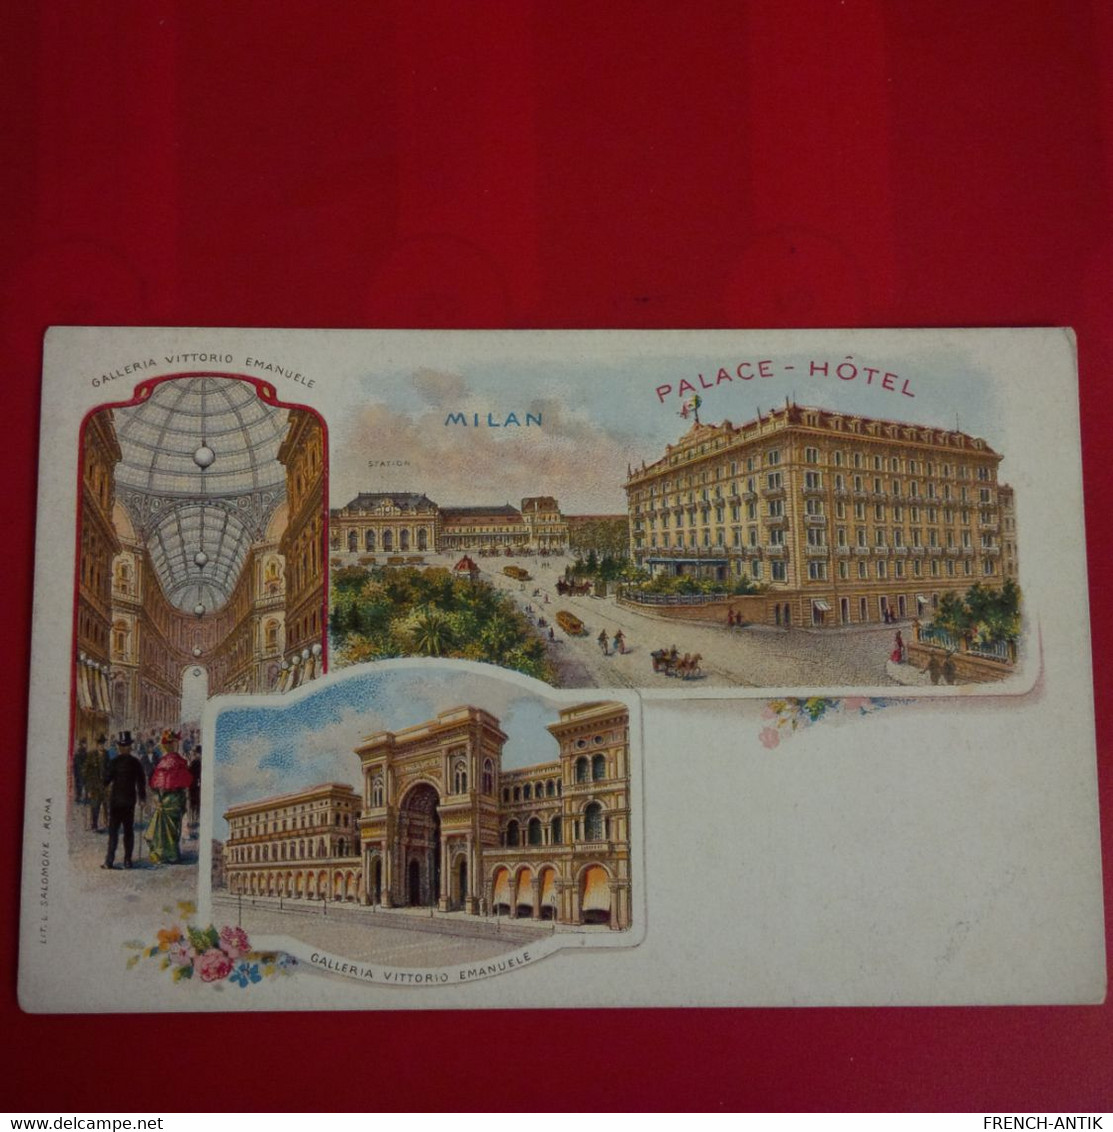 MILAN PALACE HOTEL LITHOGRAPHIE - Milano (Mailand)